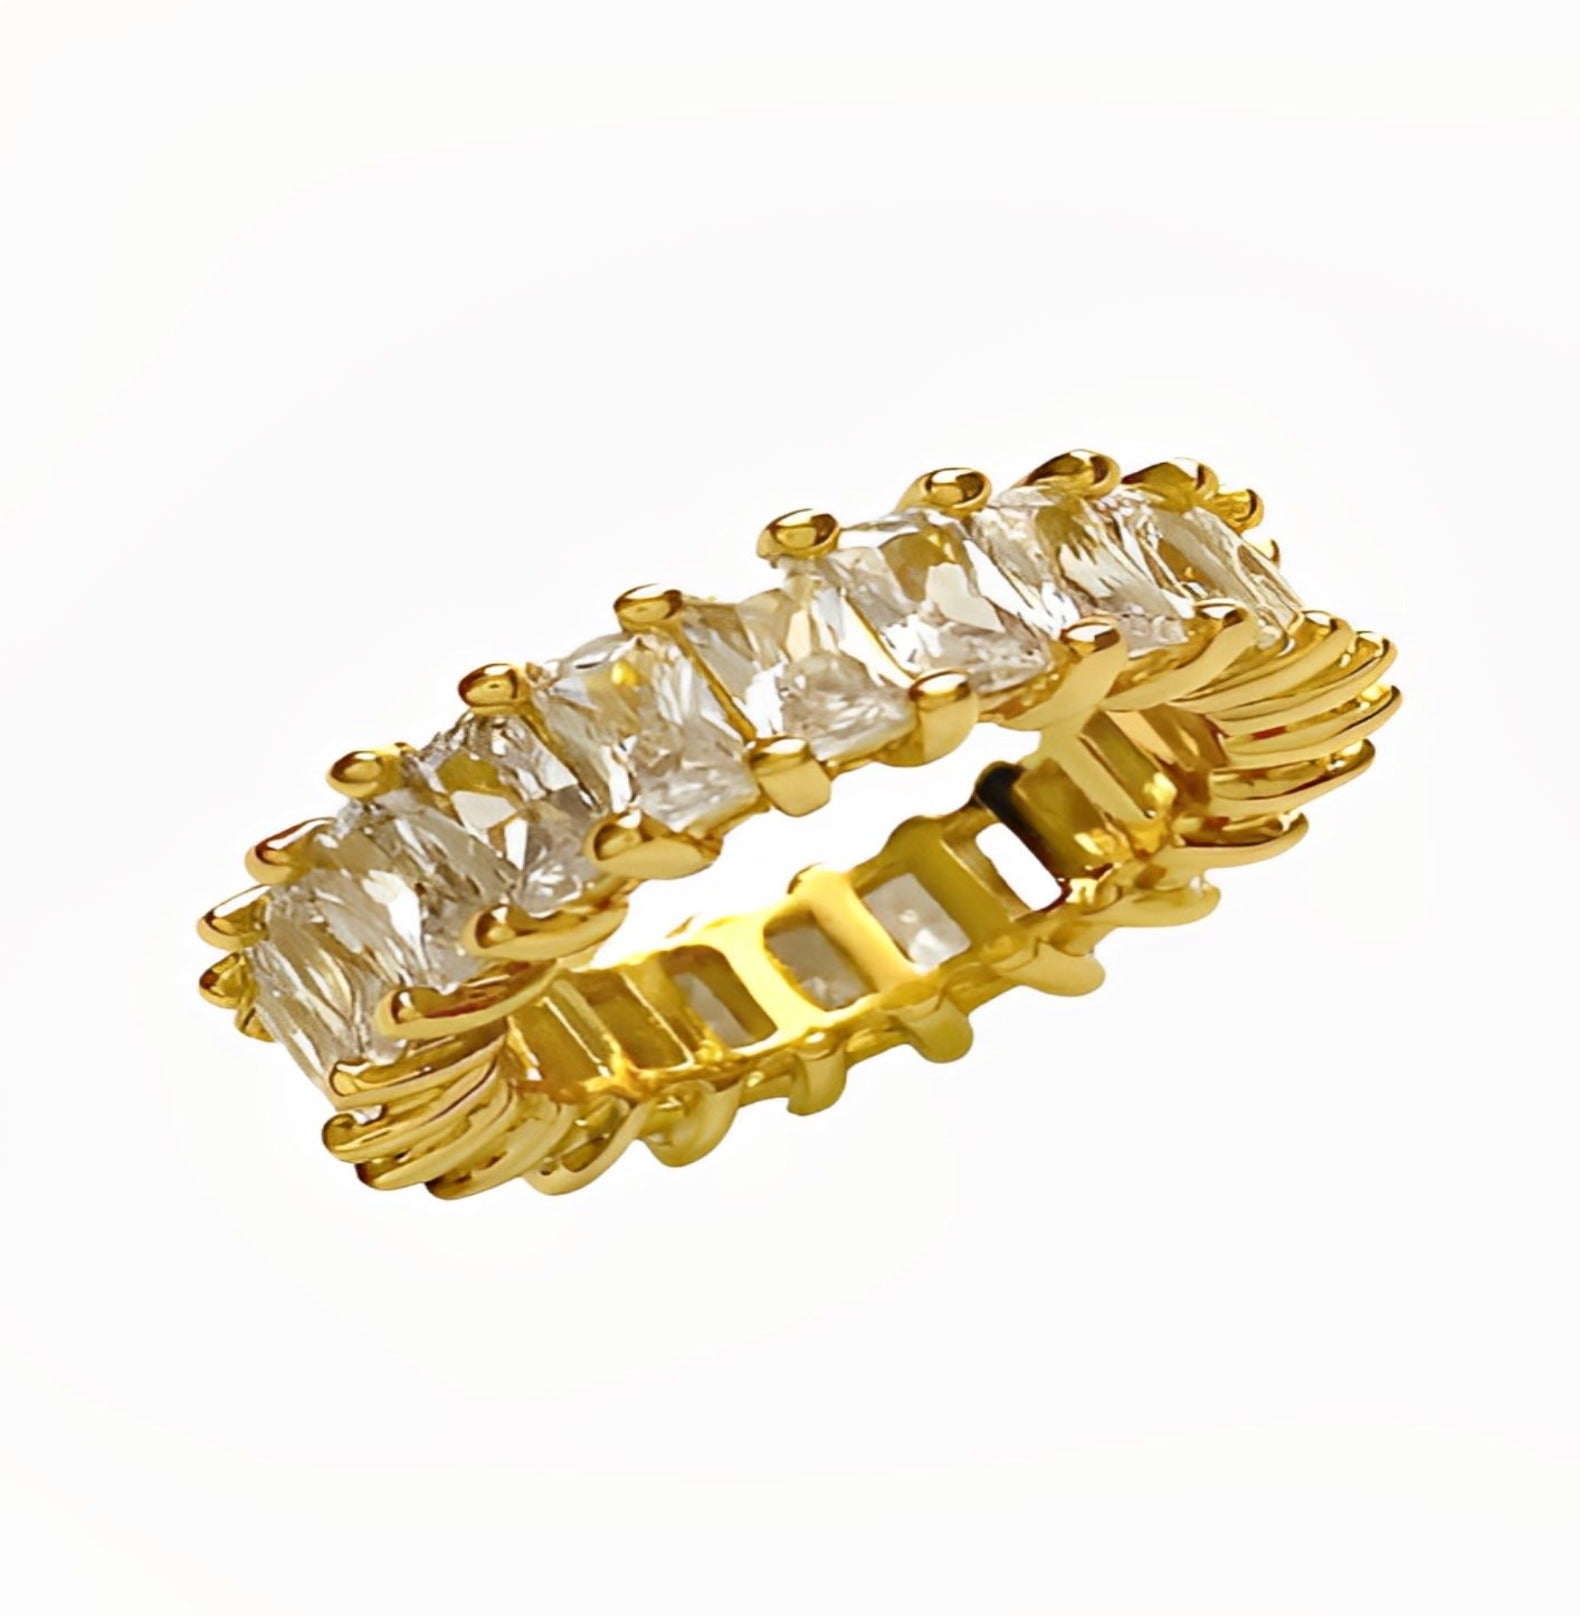 AKIRA RING ring Yubama Jewelry Online Store - The Elegant Designs of Gold and Silver ! NO.10 